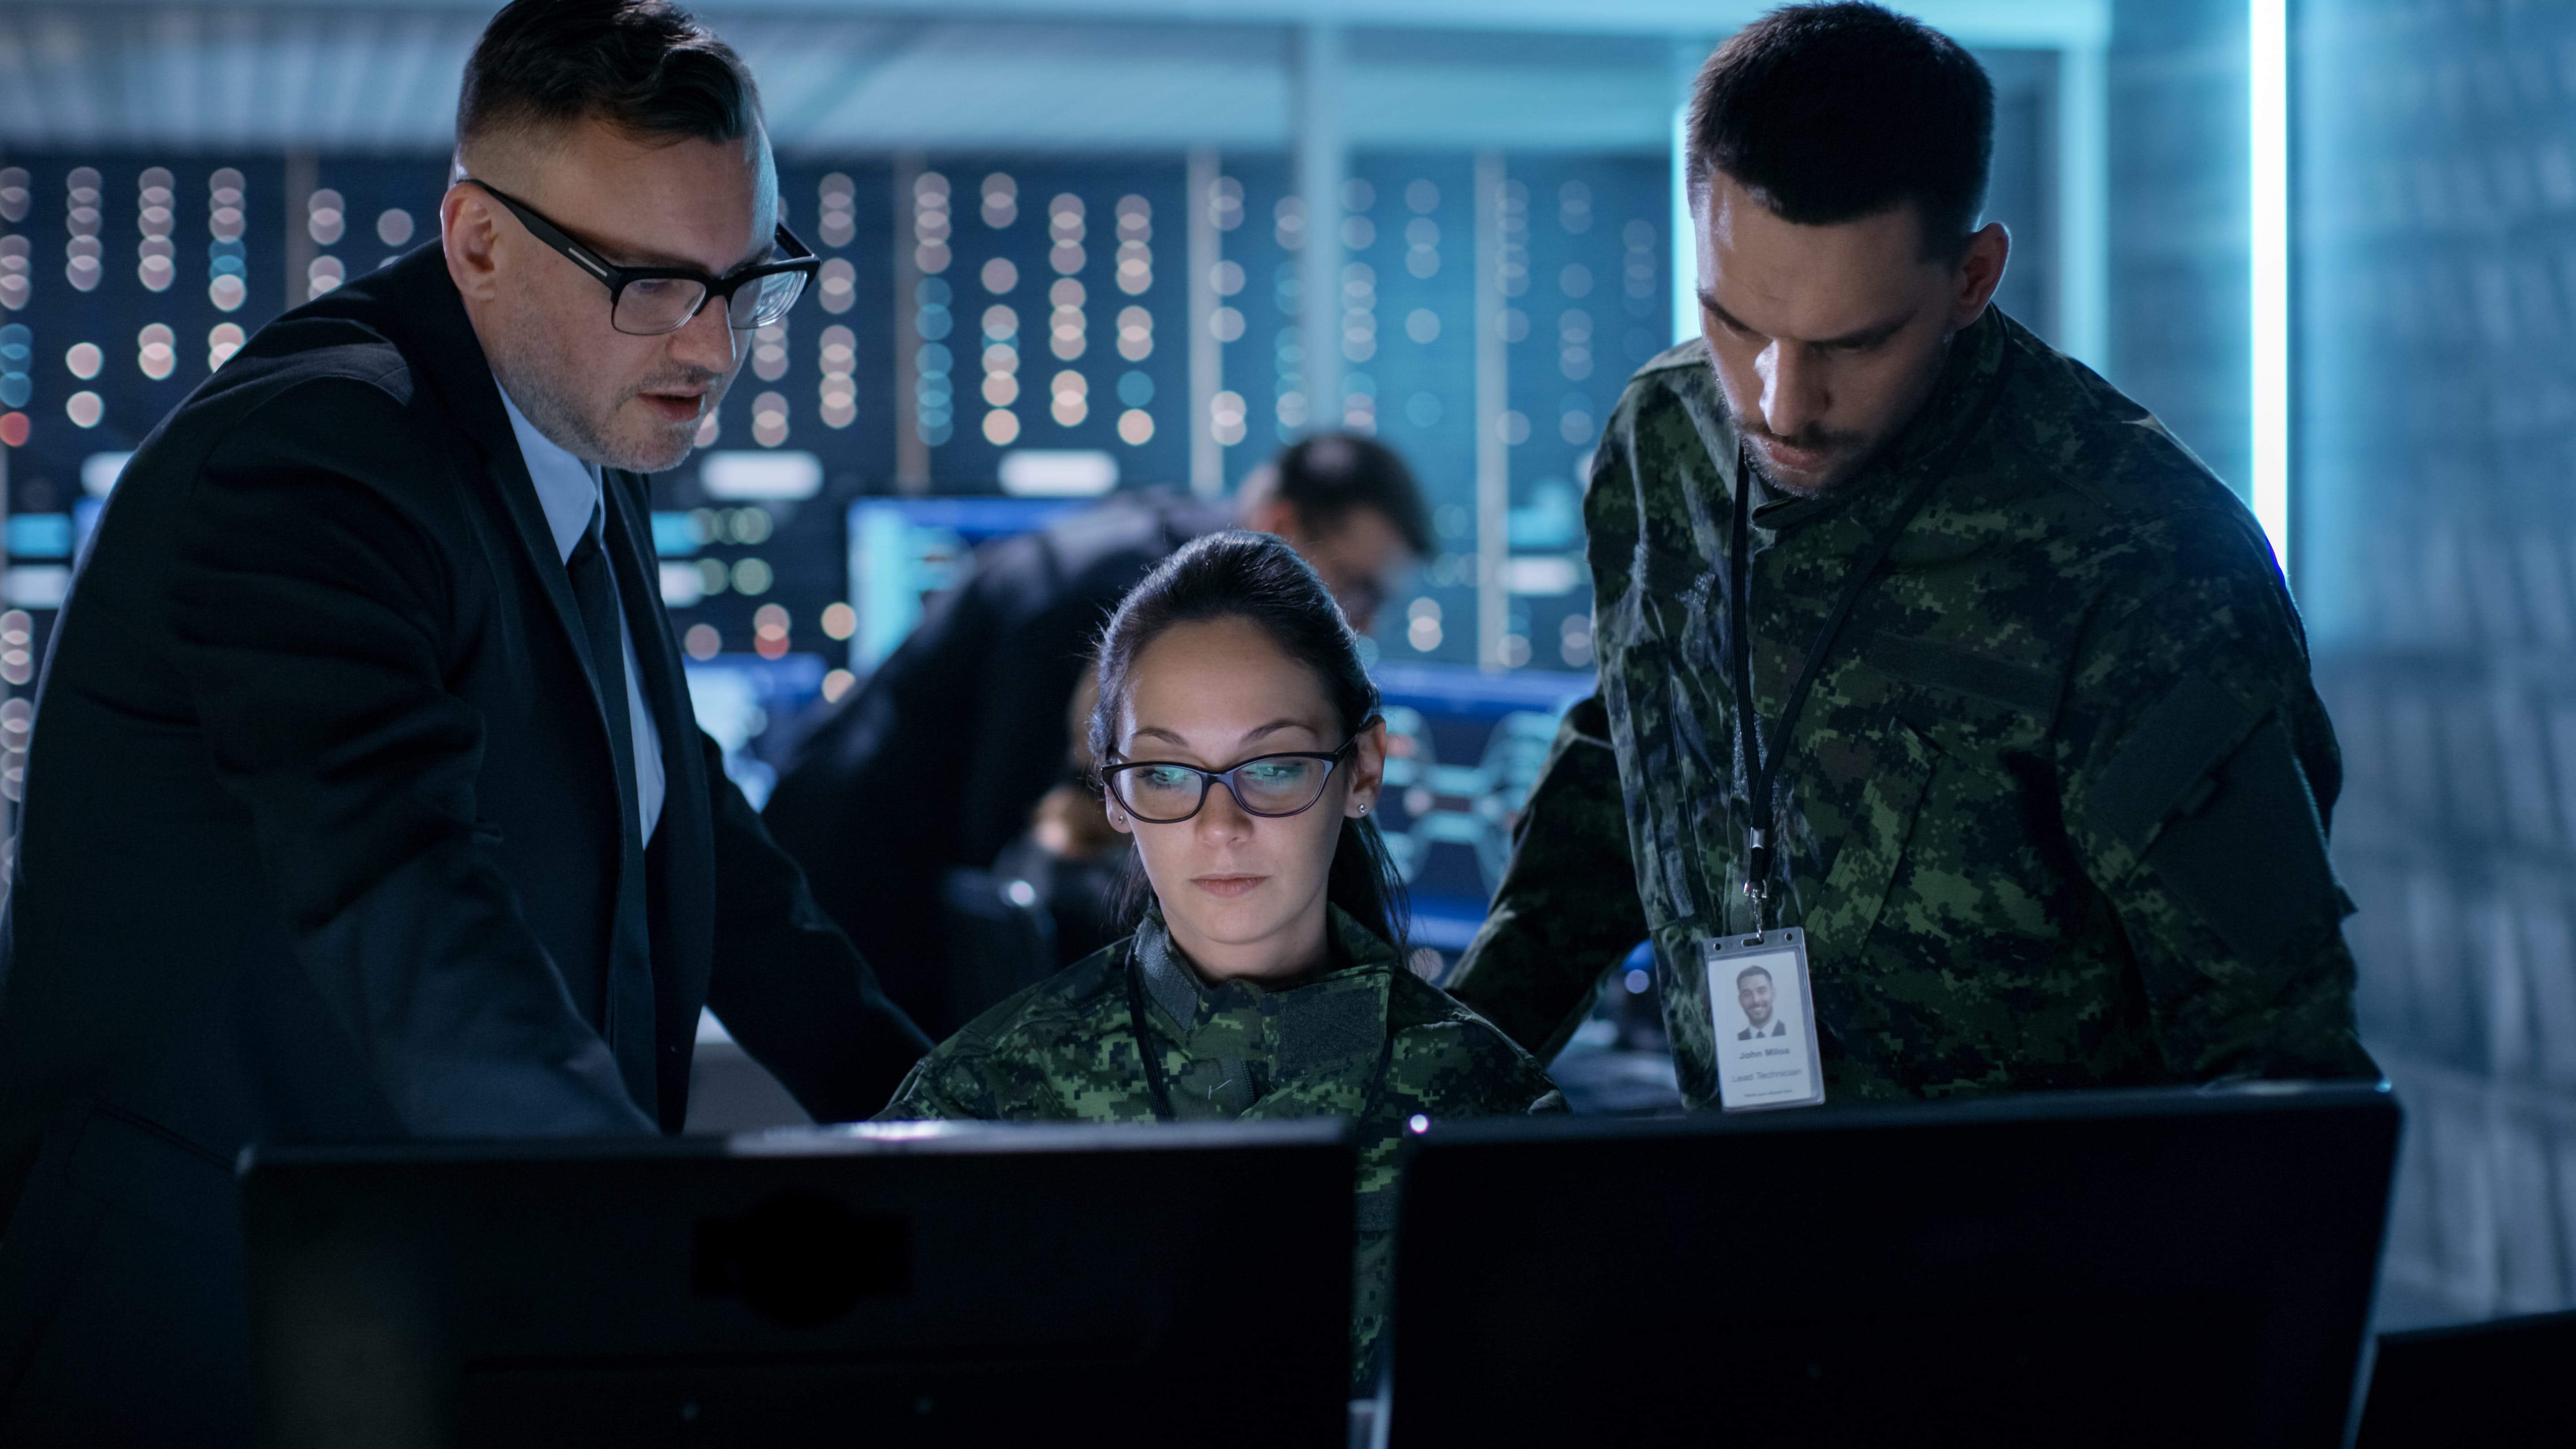 military security experts around a computer